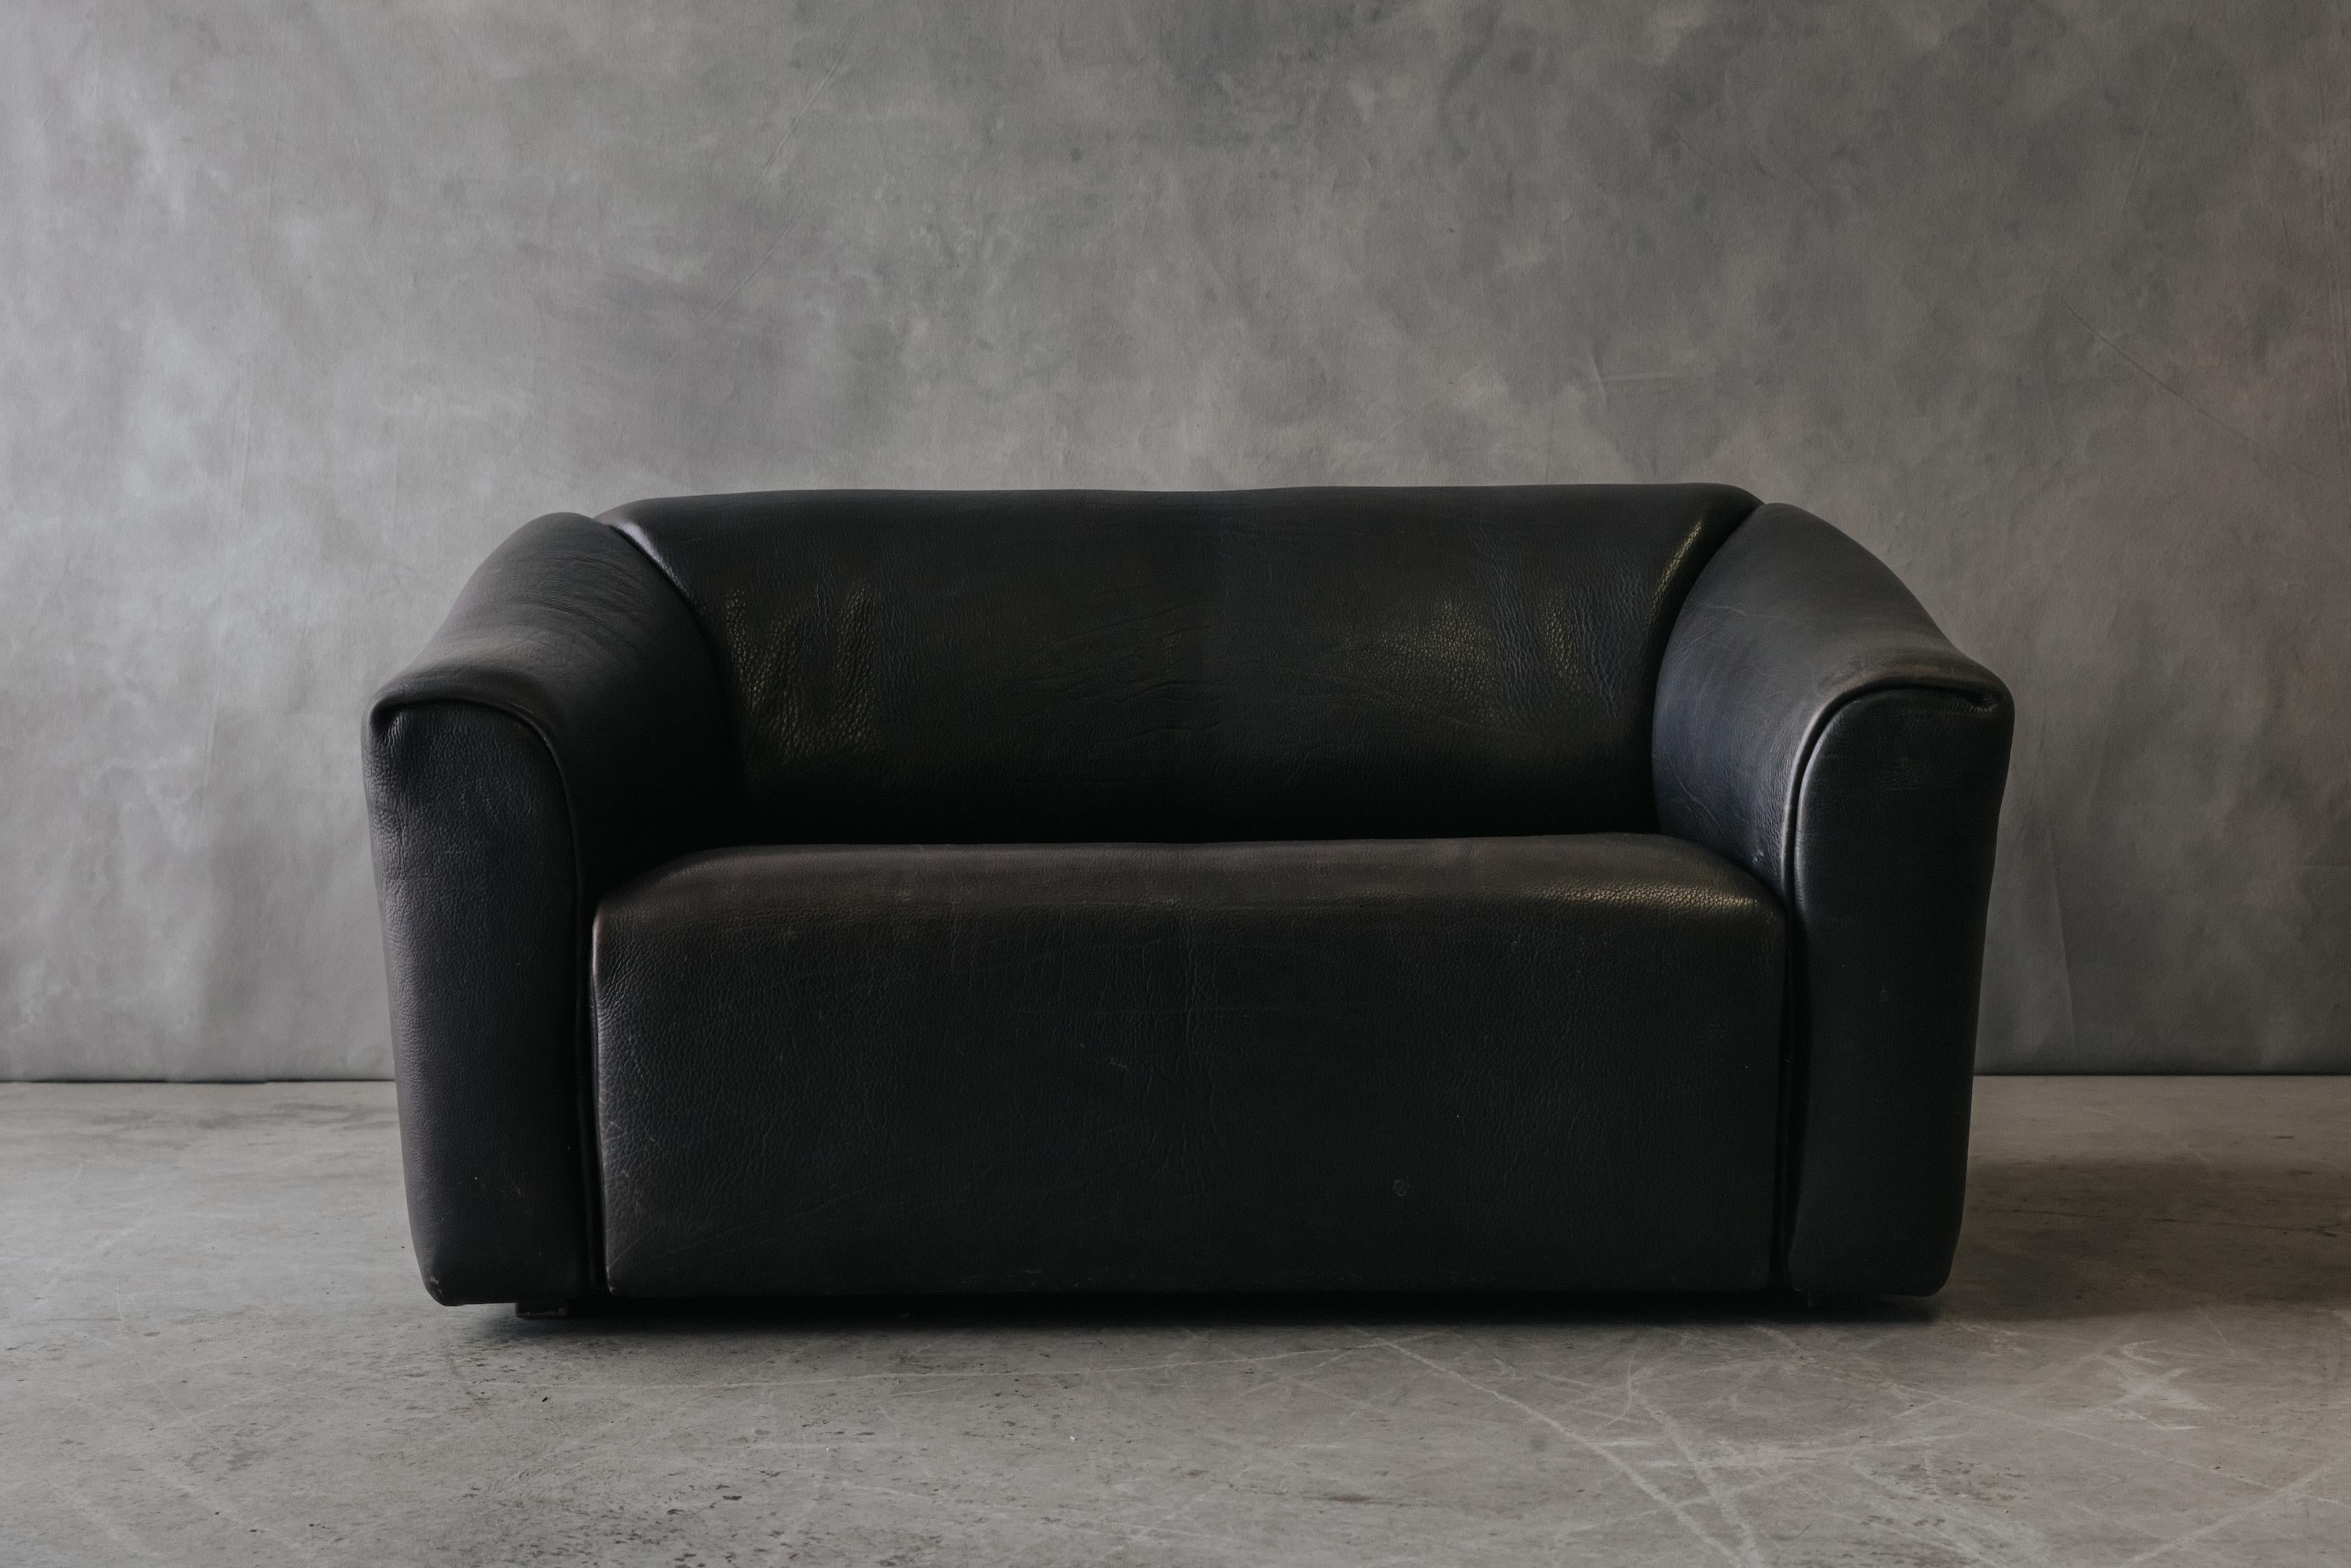 Vintage De Sede DS-47 Sofa In Black Leather, From Switzerland, Circa 1970 In Good Condition For Sale In Nashville, TN